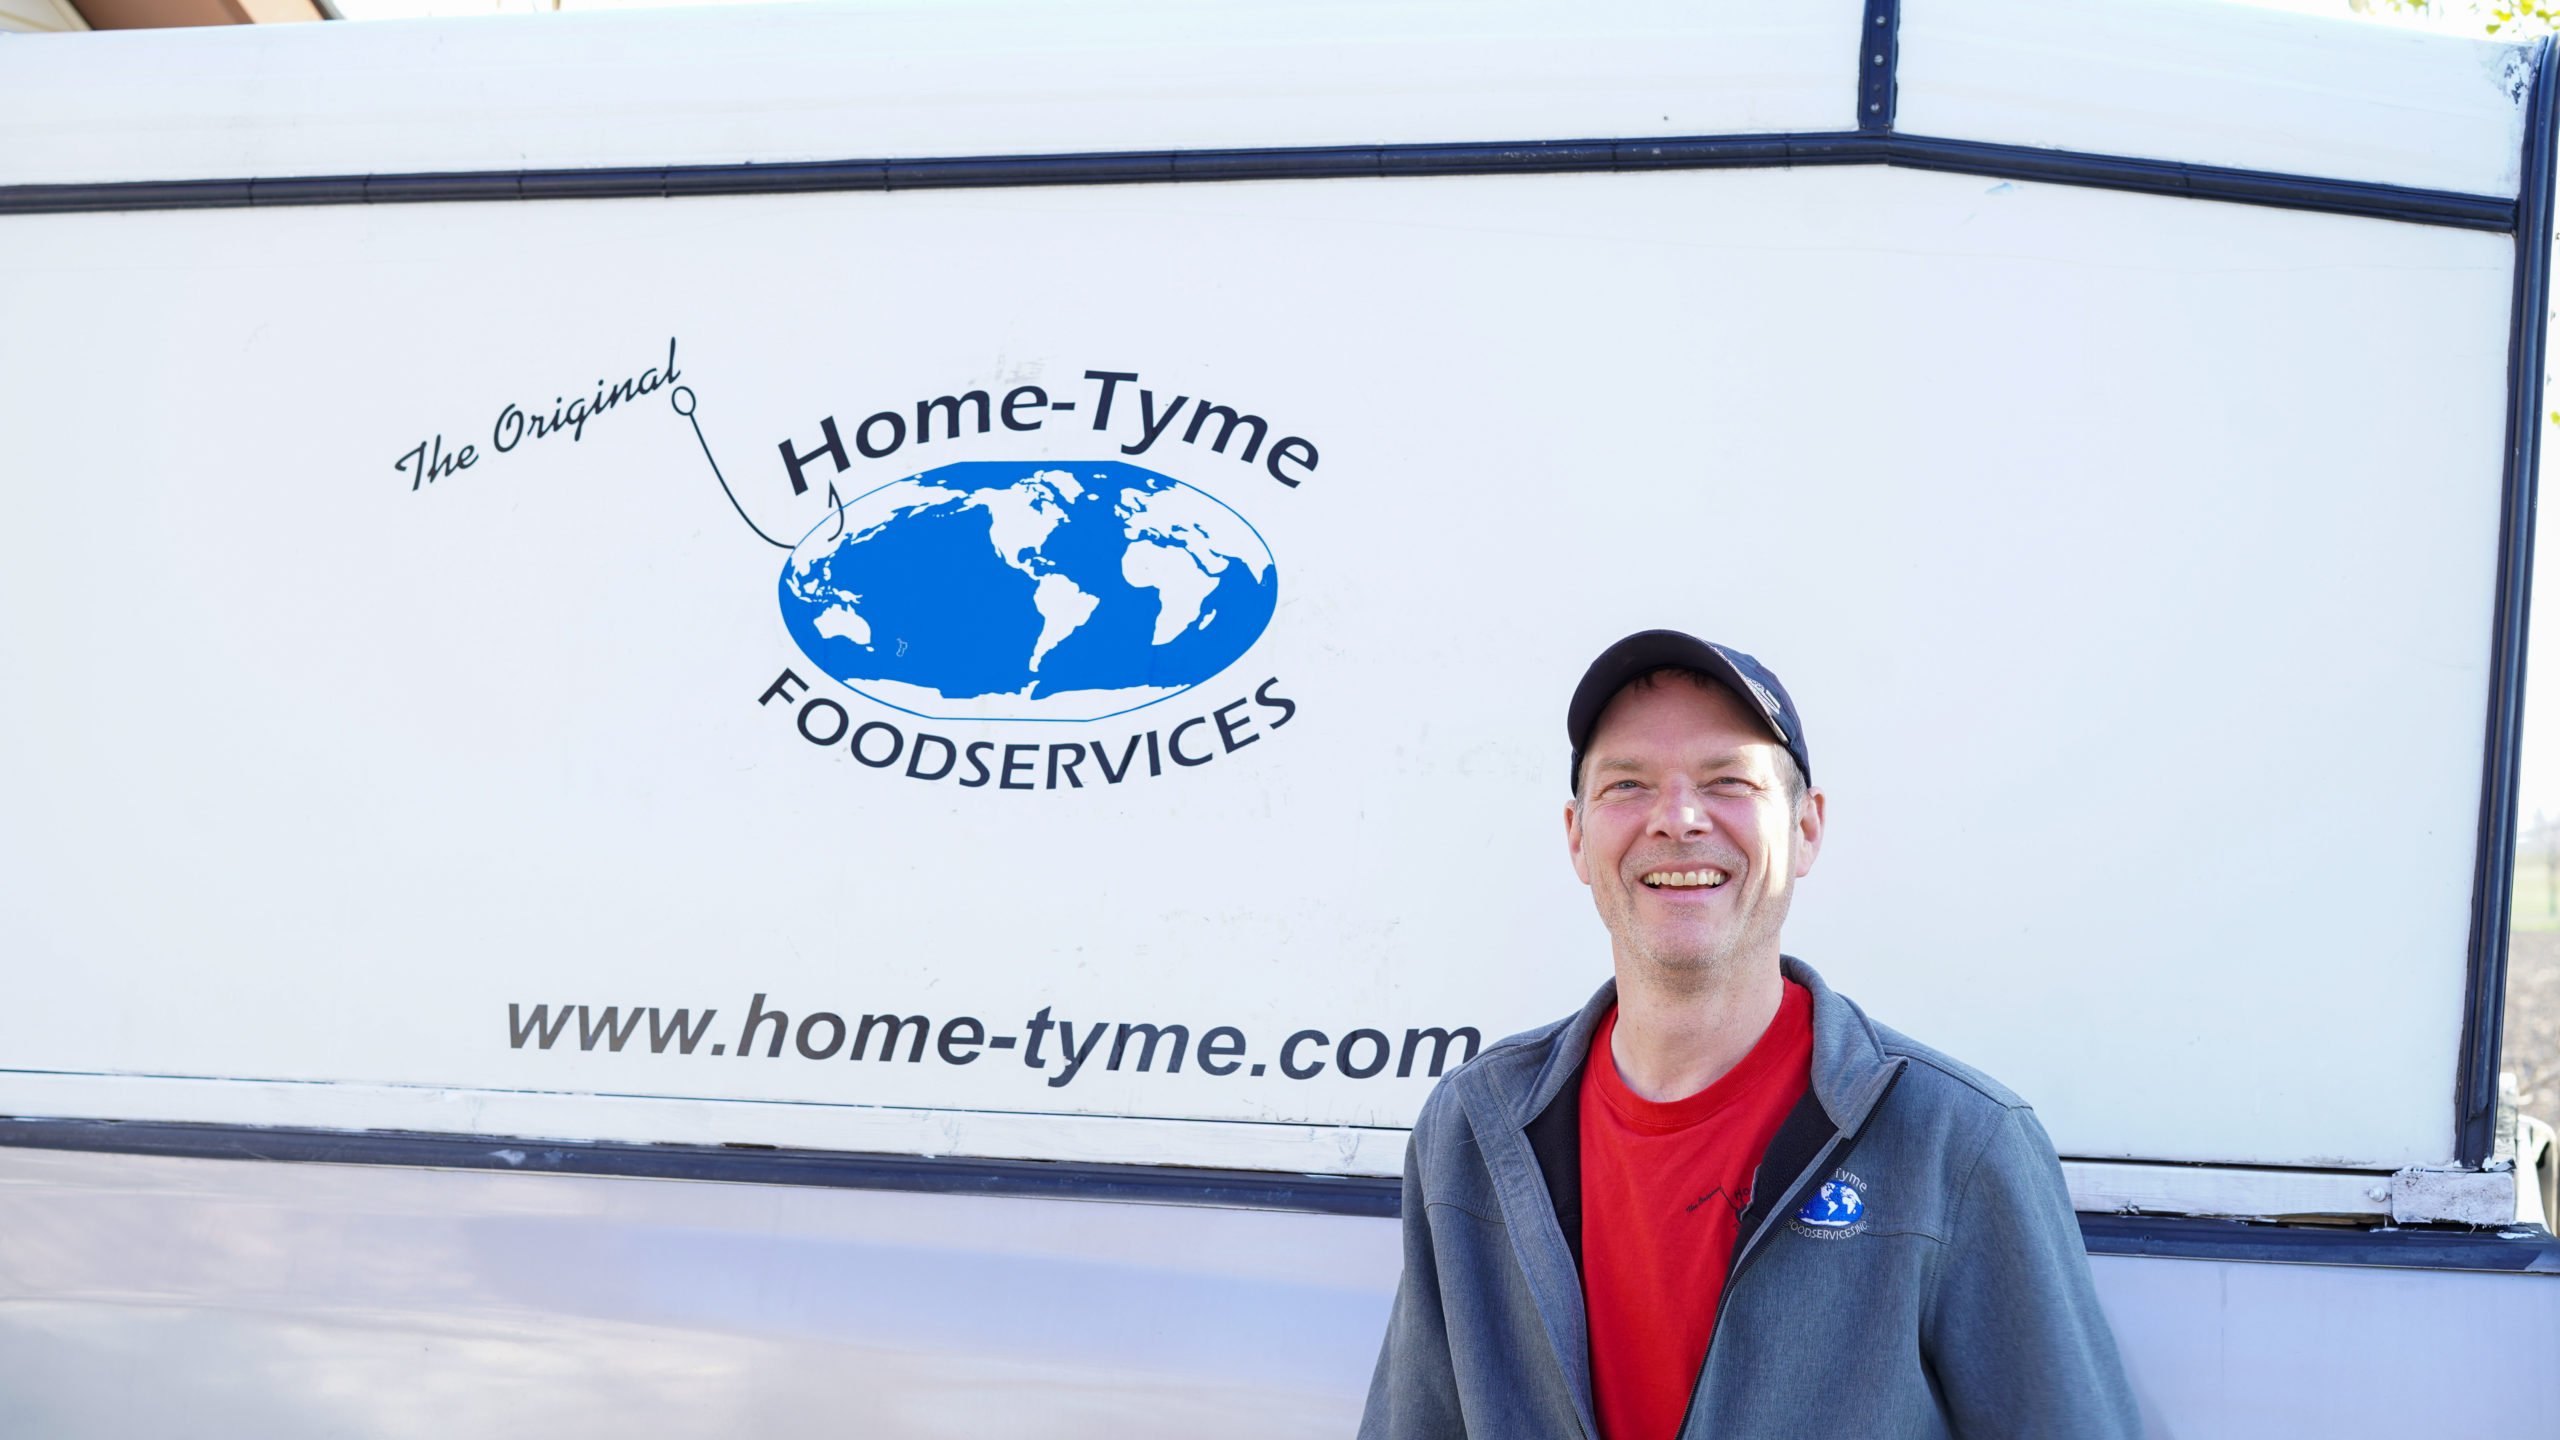 Home-Tyme Foodservice Delivery Driver | Dan/Shelly Duclos